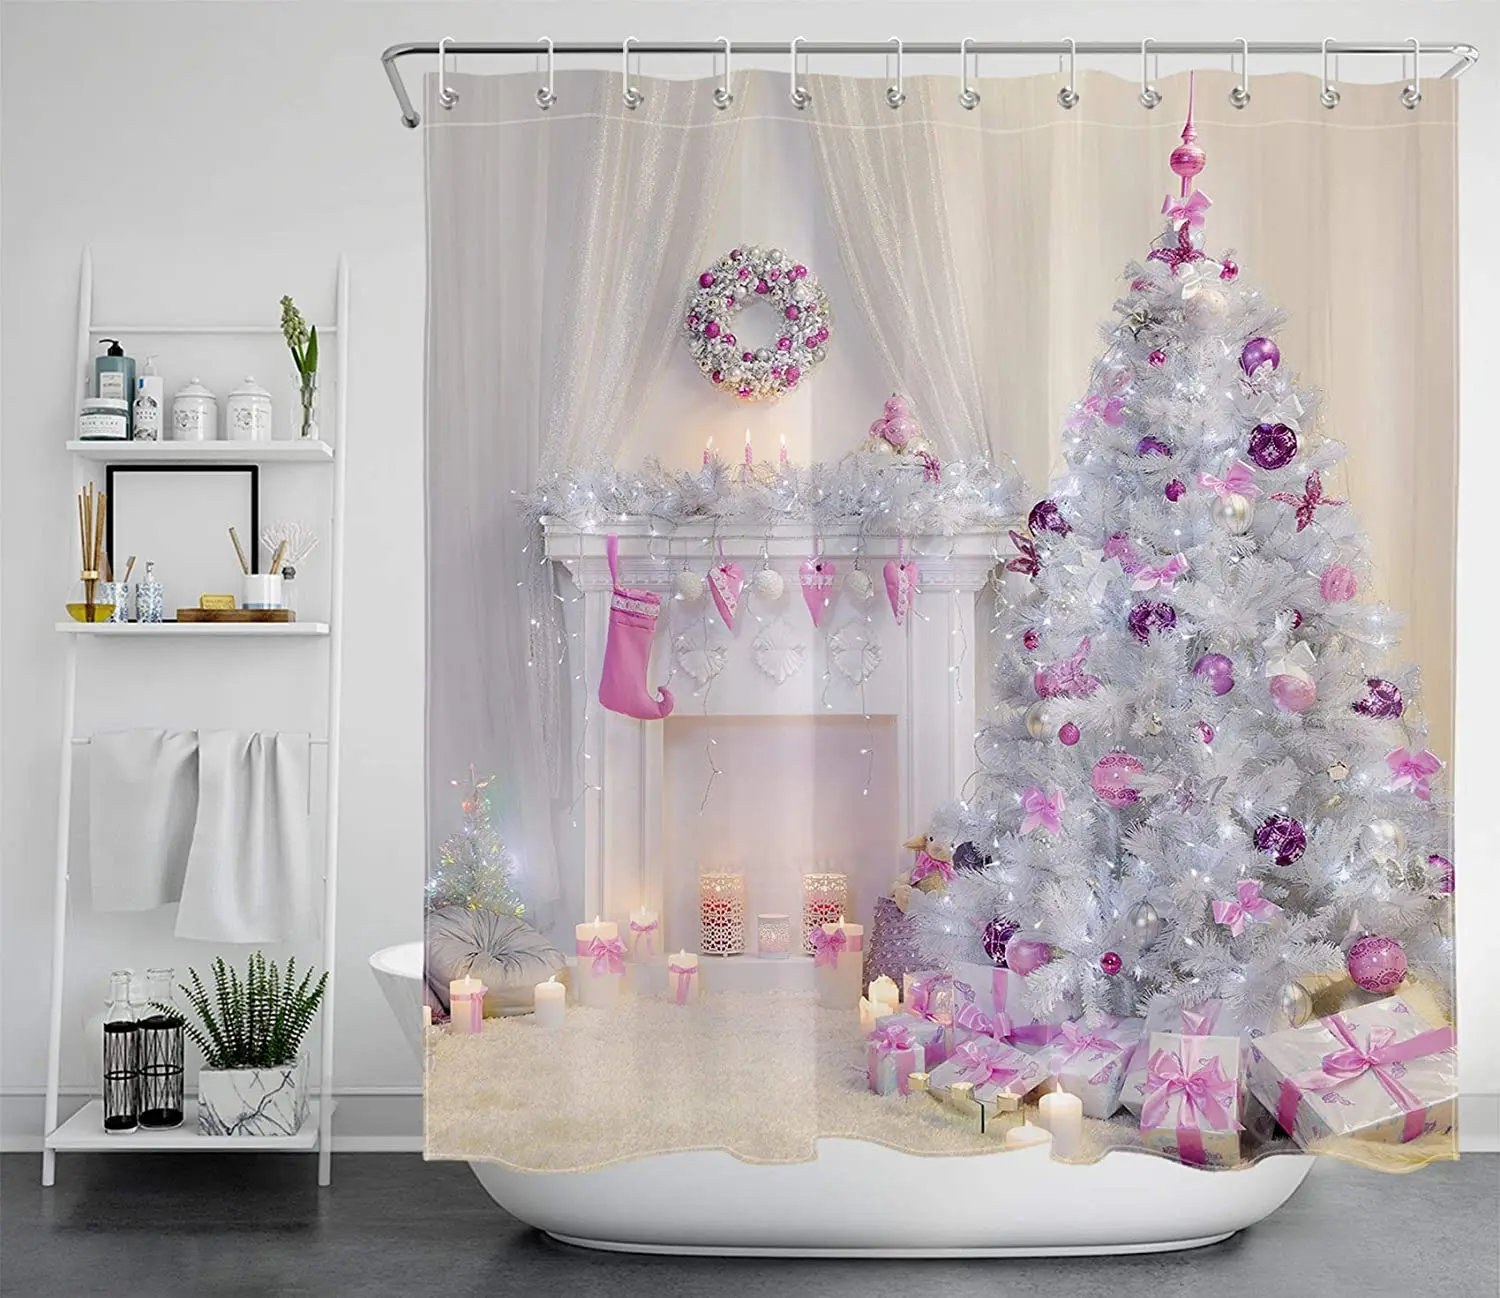 

Christmas Trees Covered by Pink Xmas Balls Gifts Fireplace Candles Bathroom Shower Curtains Set with Hooks Winter Home Decor